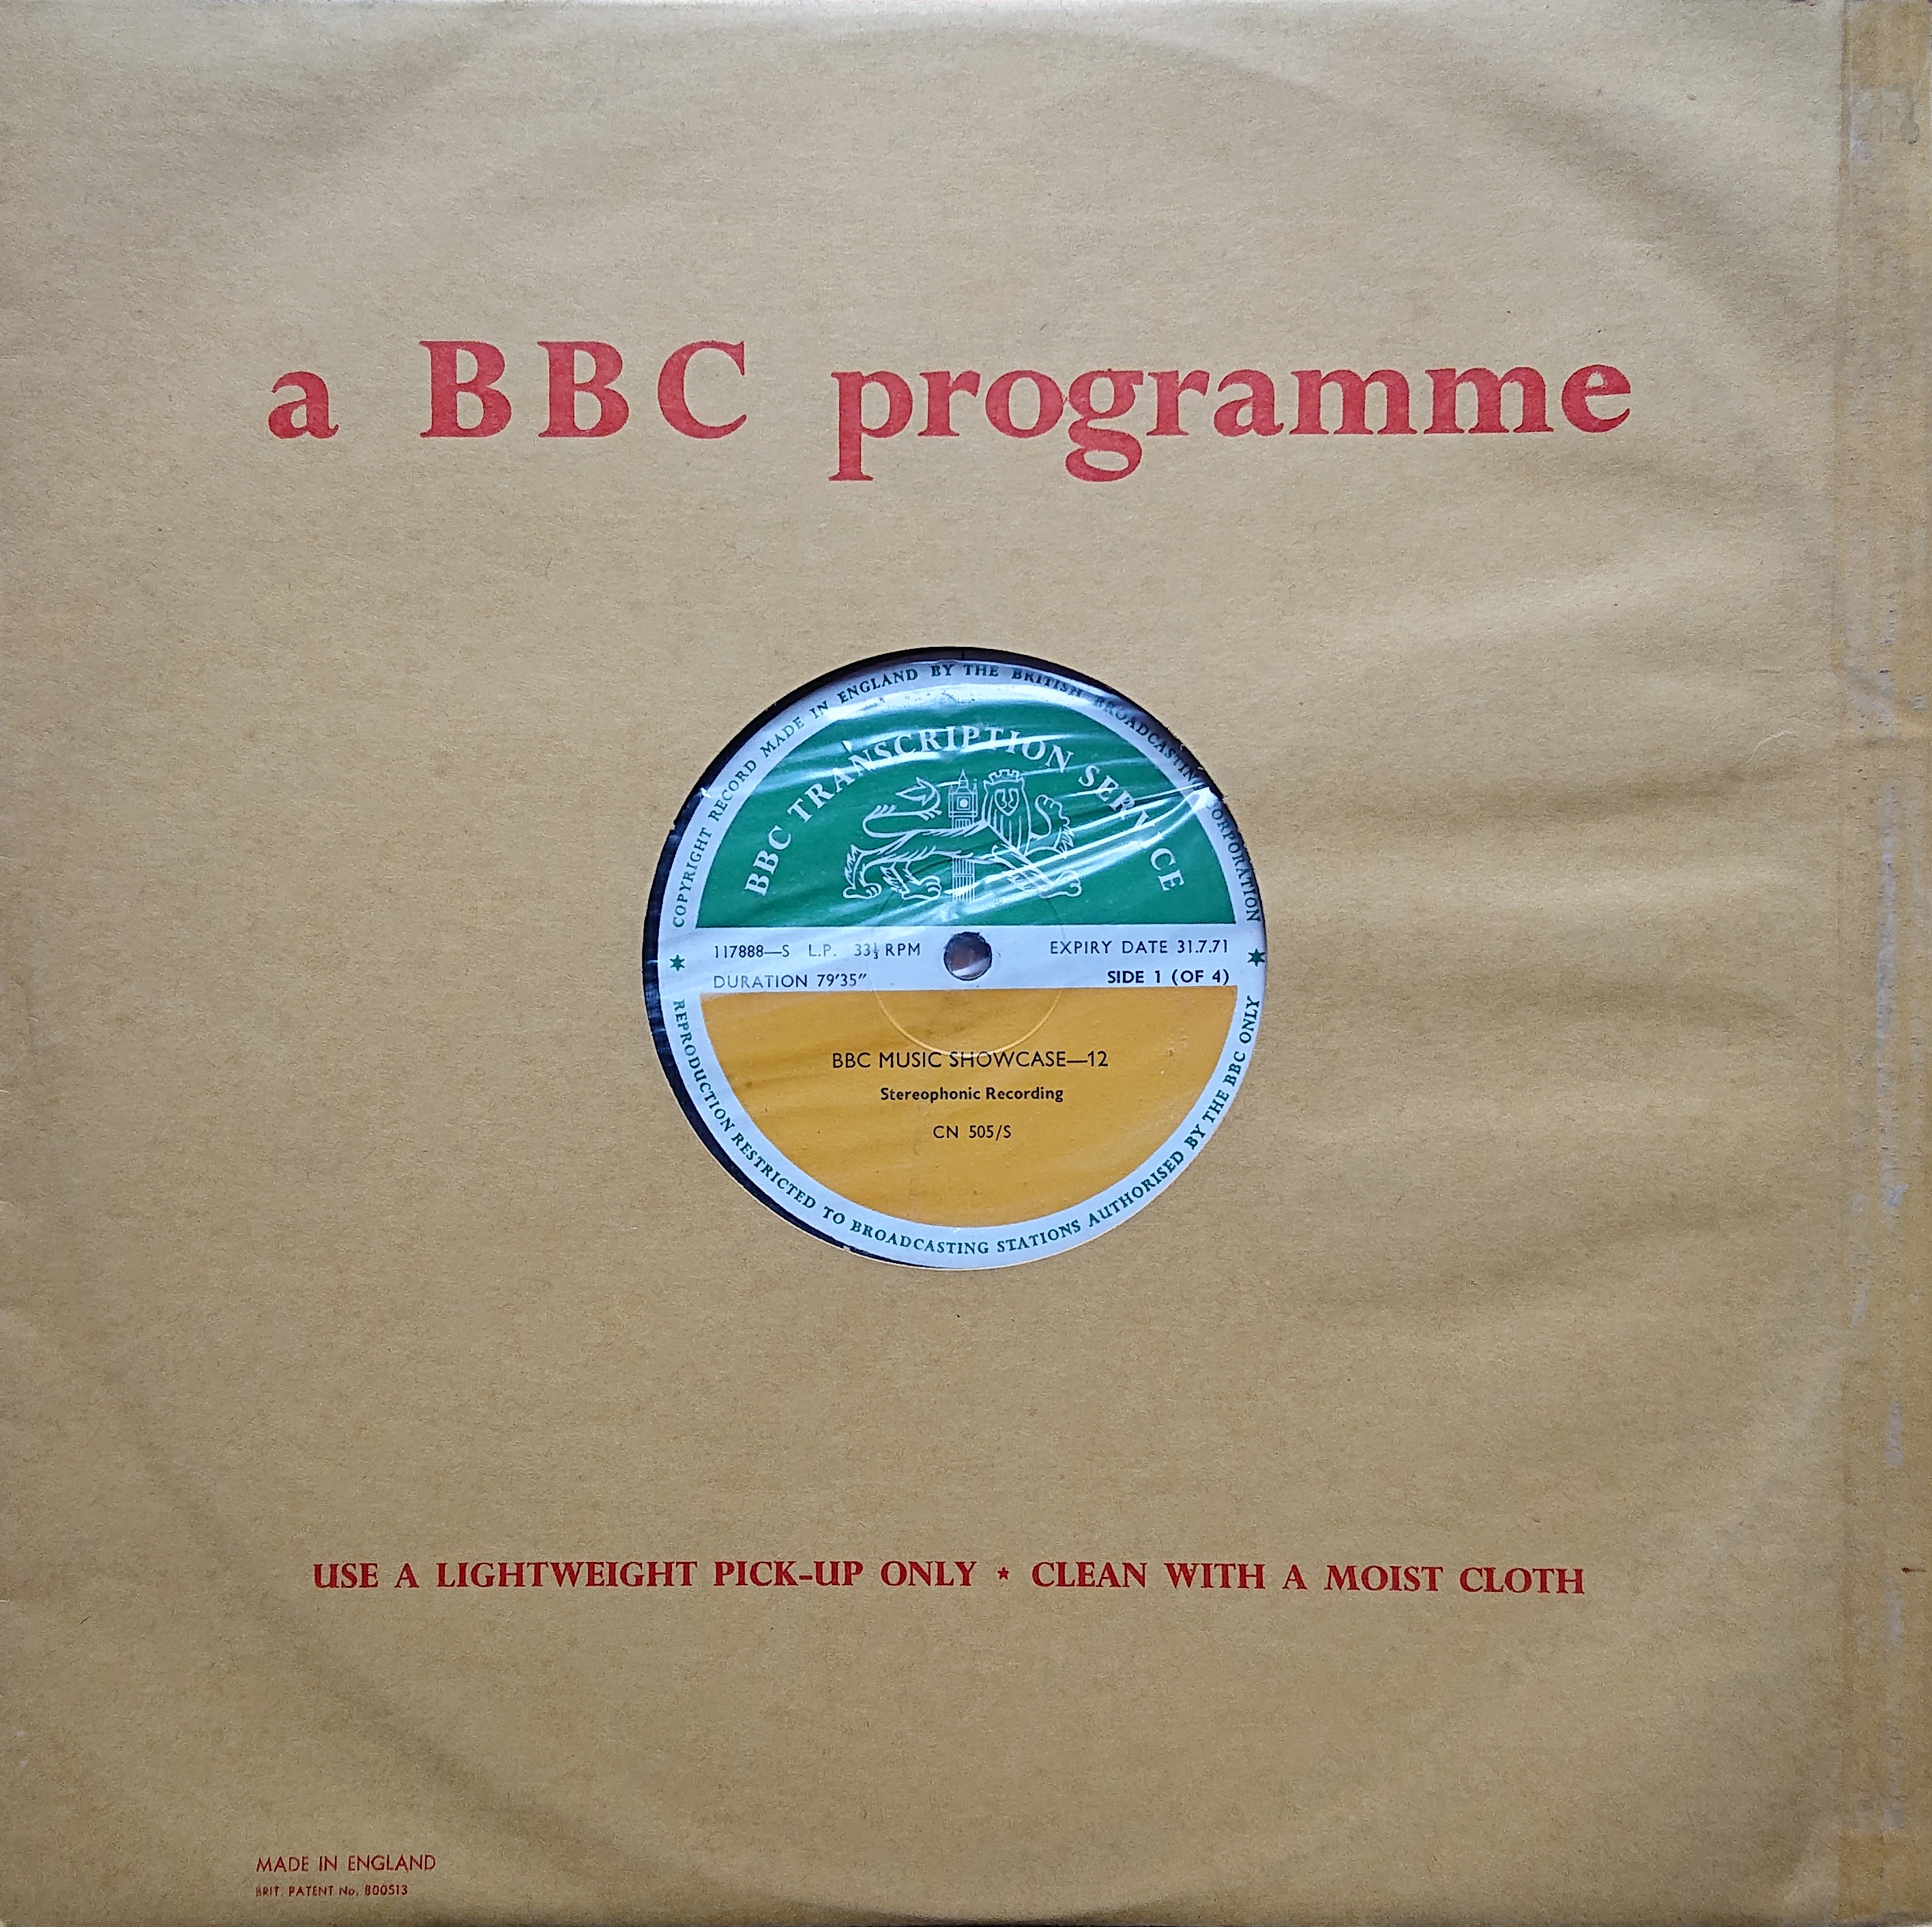 Picture of CN 505 S 23 BBC music showcase - 12 (Sides 1 & 3) by artist Various from the BBC albums - Records and Tapes library